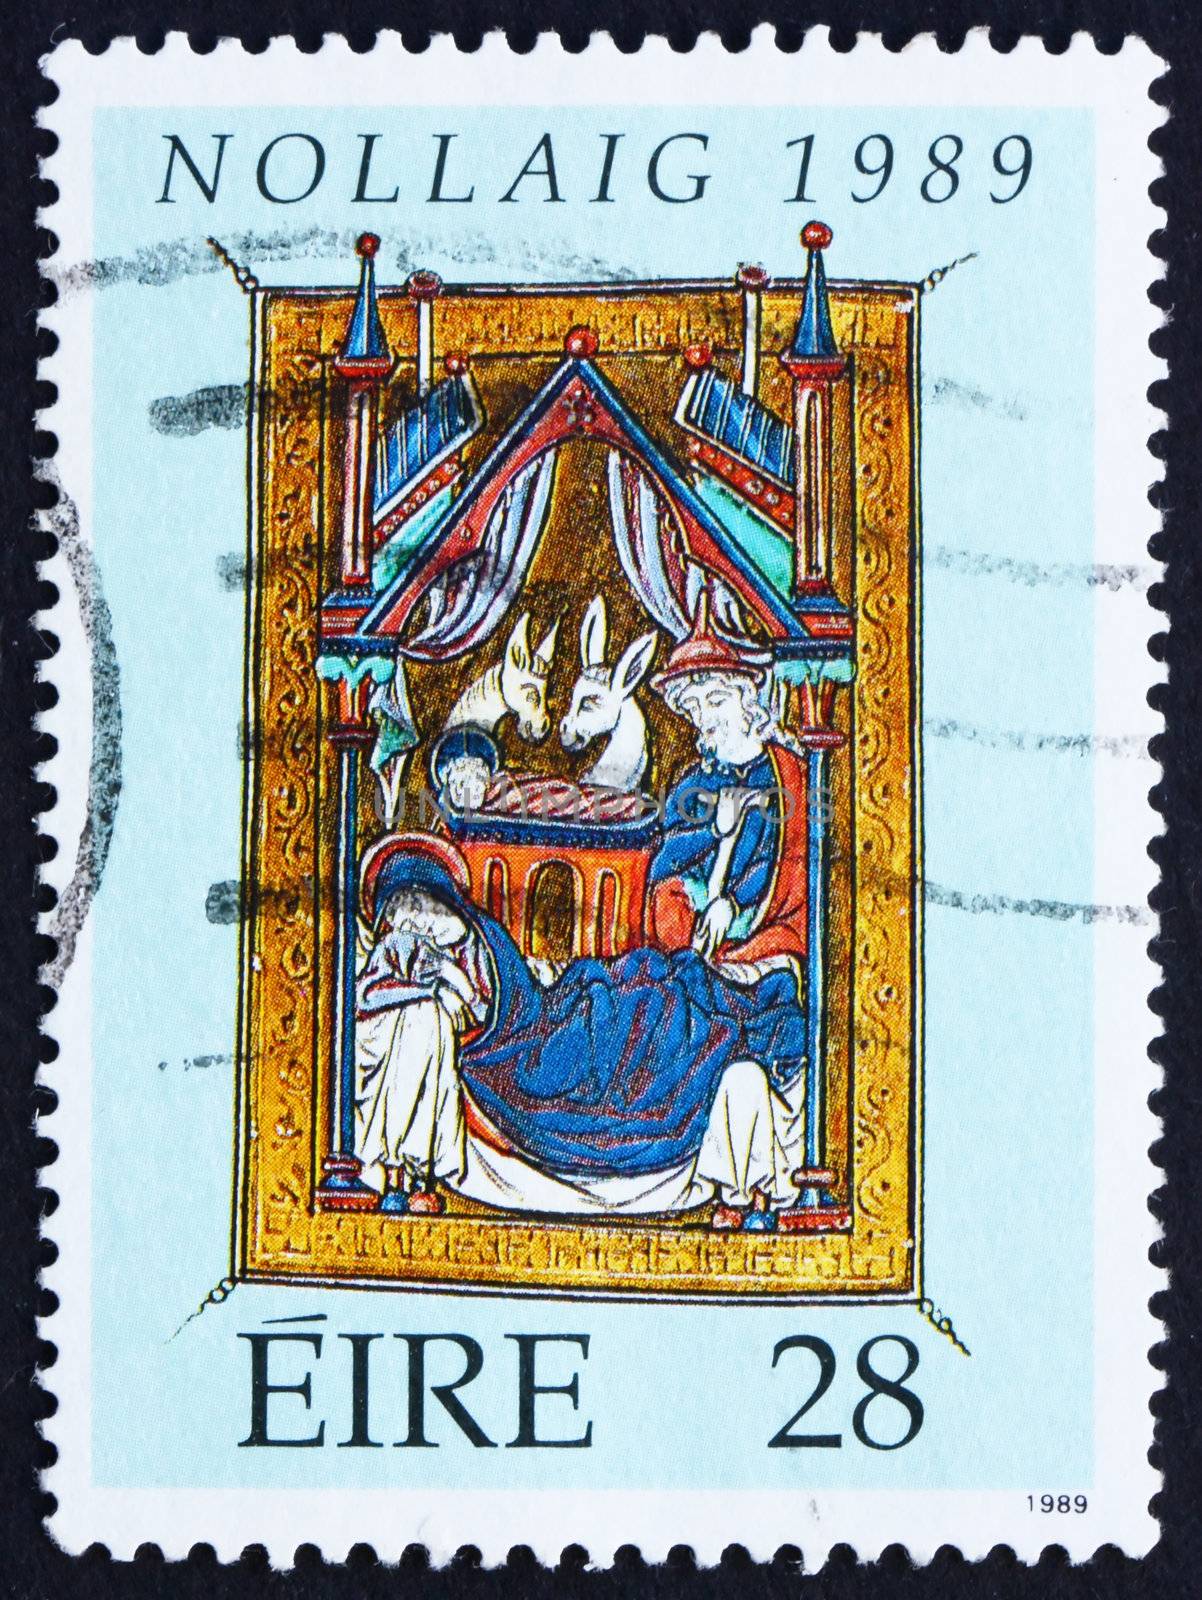 IRELAND - CIRCA 1989: a stamp printed in the Ireland shows Nativity, Miniature from Flemish Psalter, 13th Century, Christmas, circa 1989